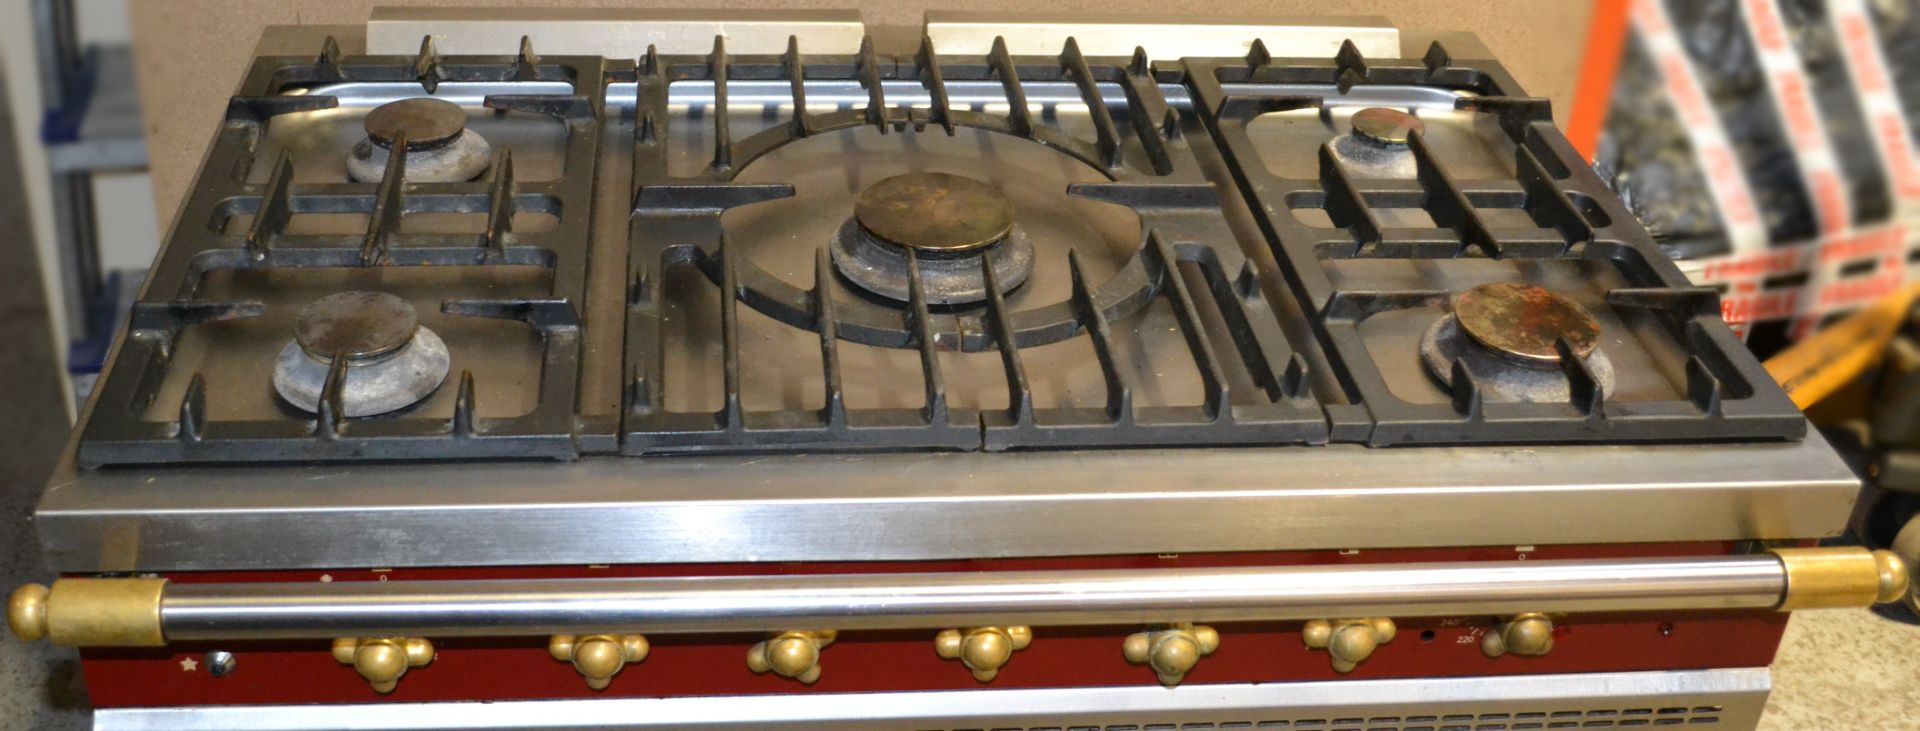 1 x Lacanche Cluny Classic 100 (Cote d'Or) Range Cooker Double Oven in Red - Dual Fuel - Used - - Image 11 of 21